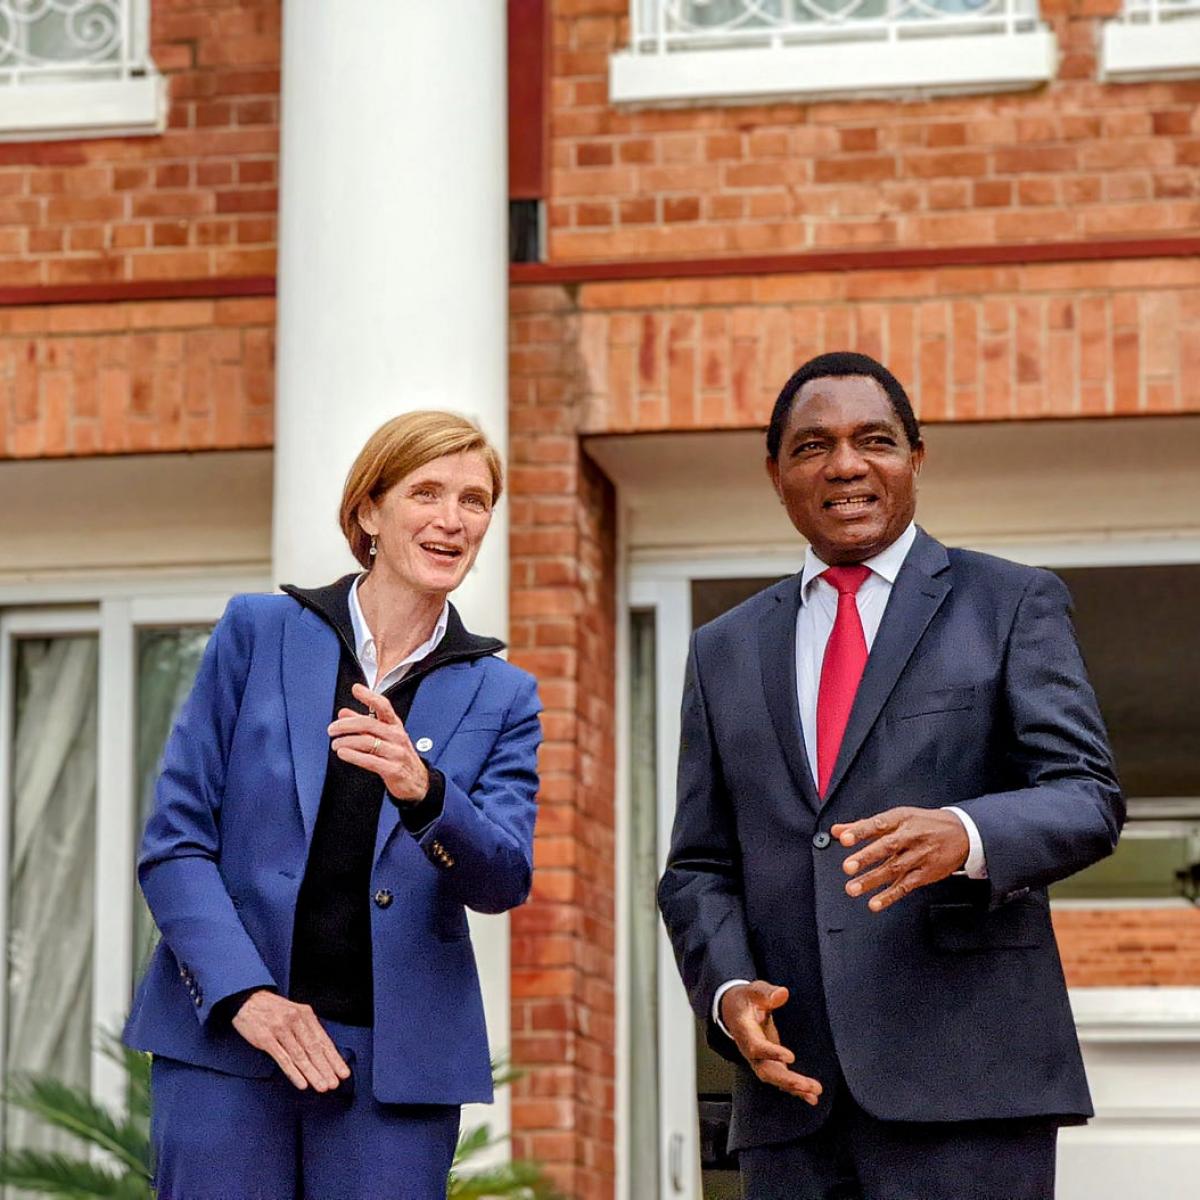 USAID Administrator Samantha Power with Zambia President Hakainde Hichilema in Zambia. During the June 2022 visit, Power discussed the president’s reform agenda and how the United States can support the government as it works to advance democracy and deliver for the people of Zambia.